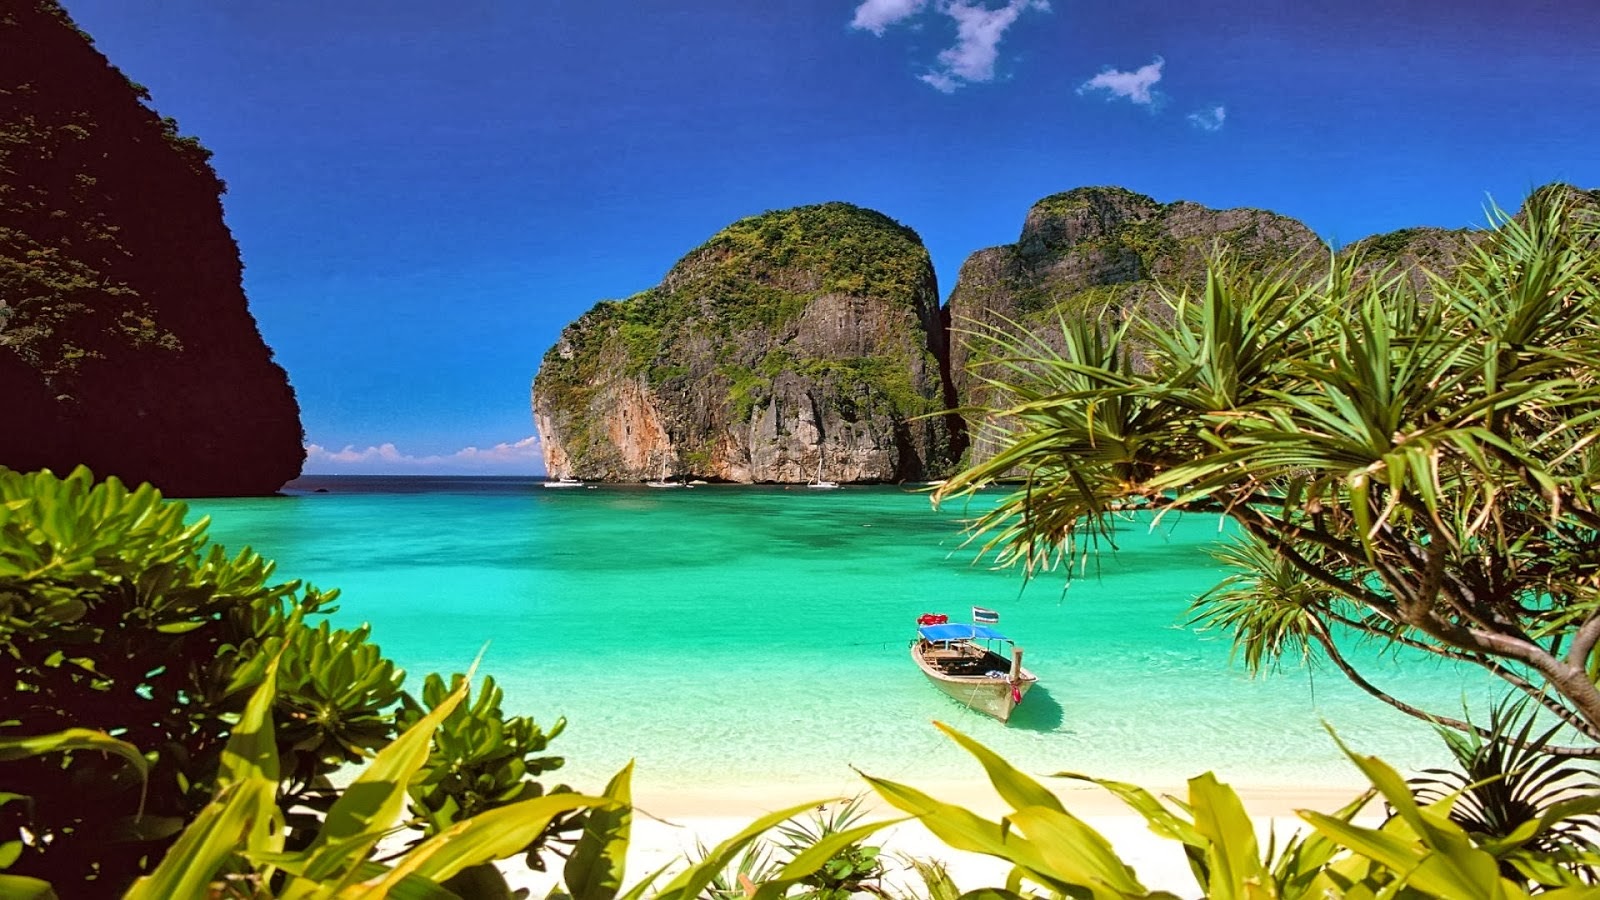 HD WALLPAPERS Download Thailand Beach HD Wallpapers